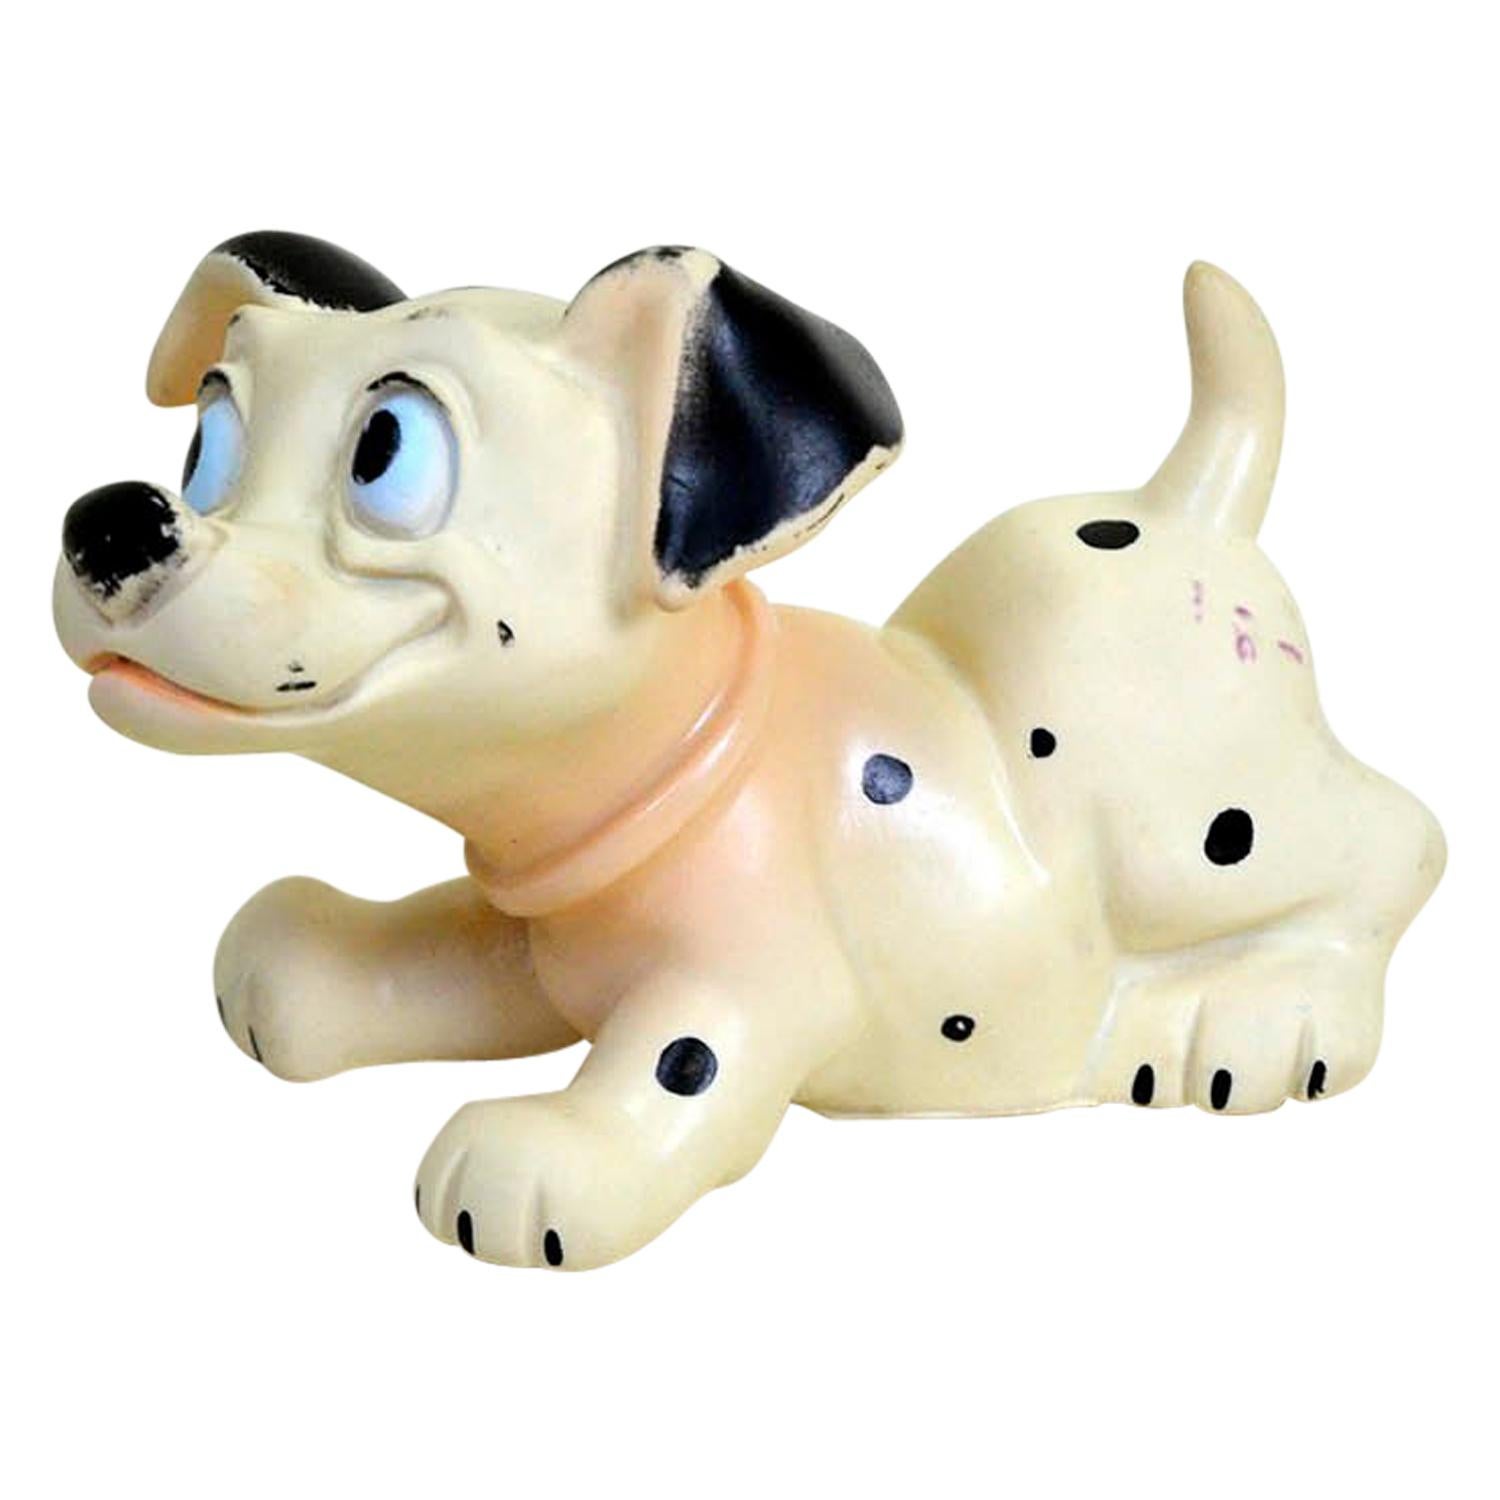 1960s Vintage Original Disney One Hundred and One Dalmatians Rubber Squeak Toy For Sale